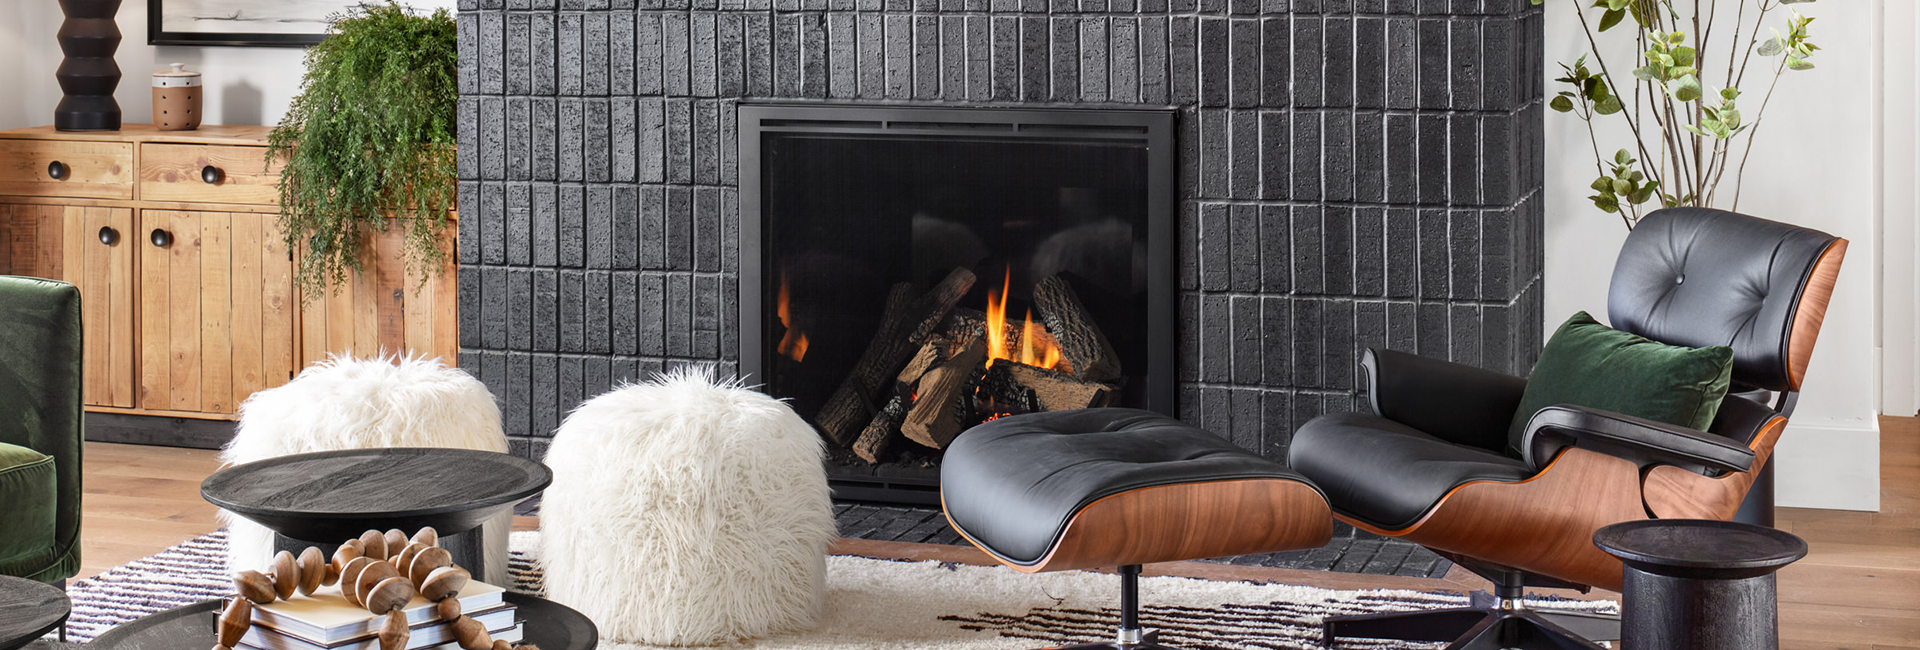 Black tile fireplace in a home with modern furnishings